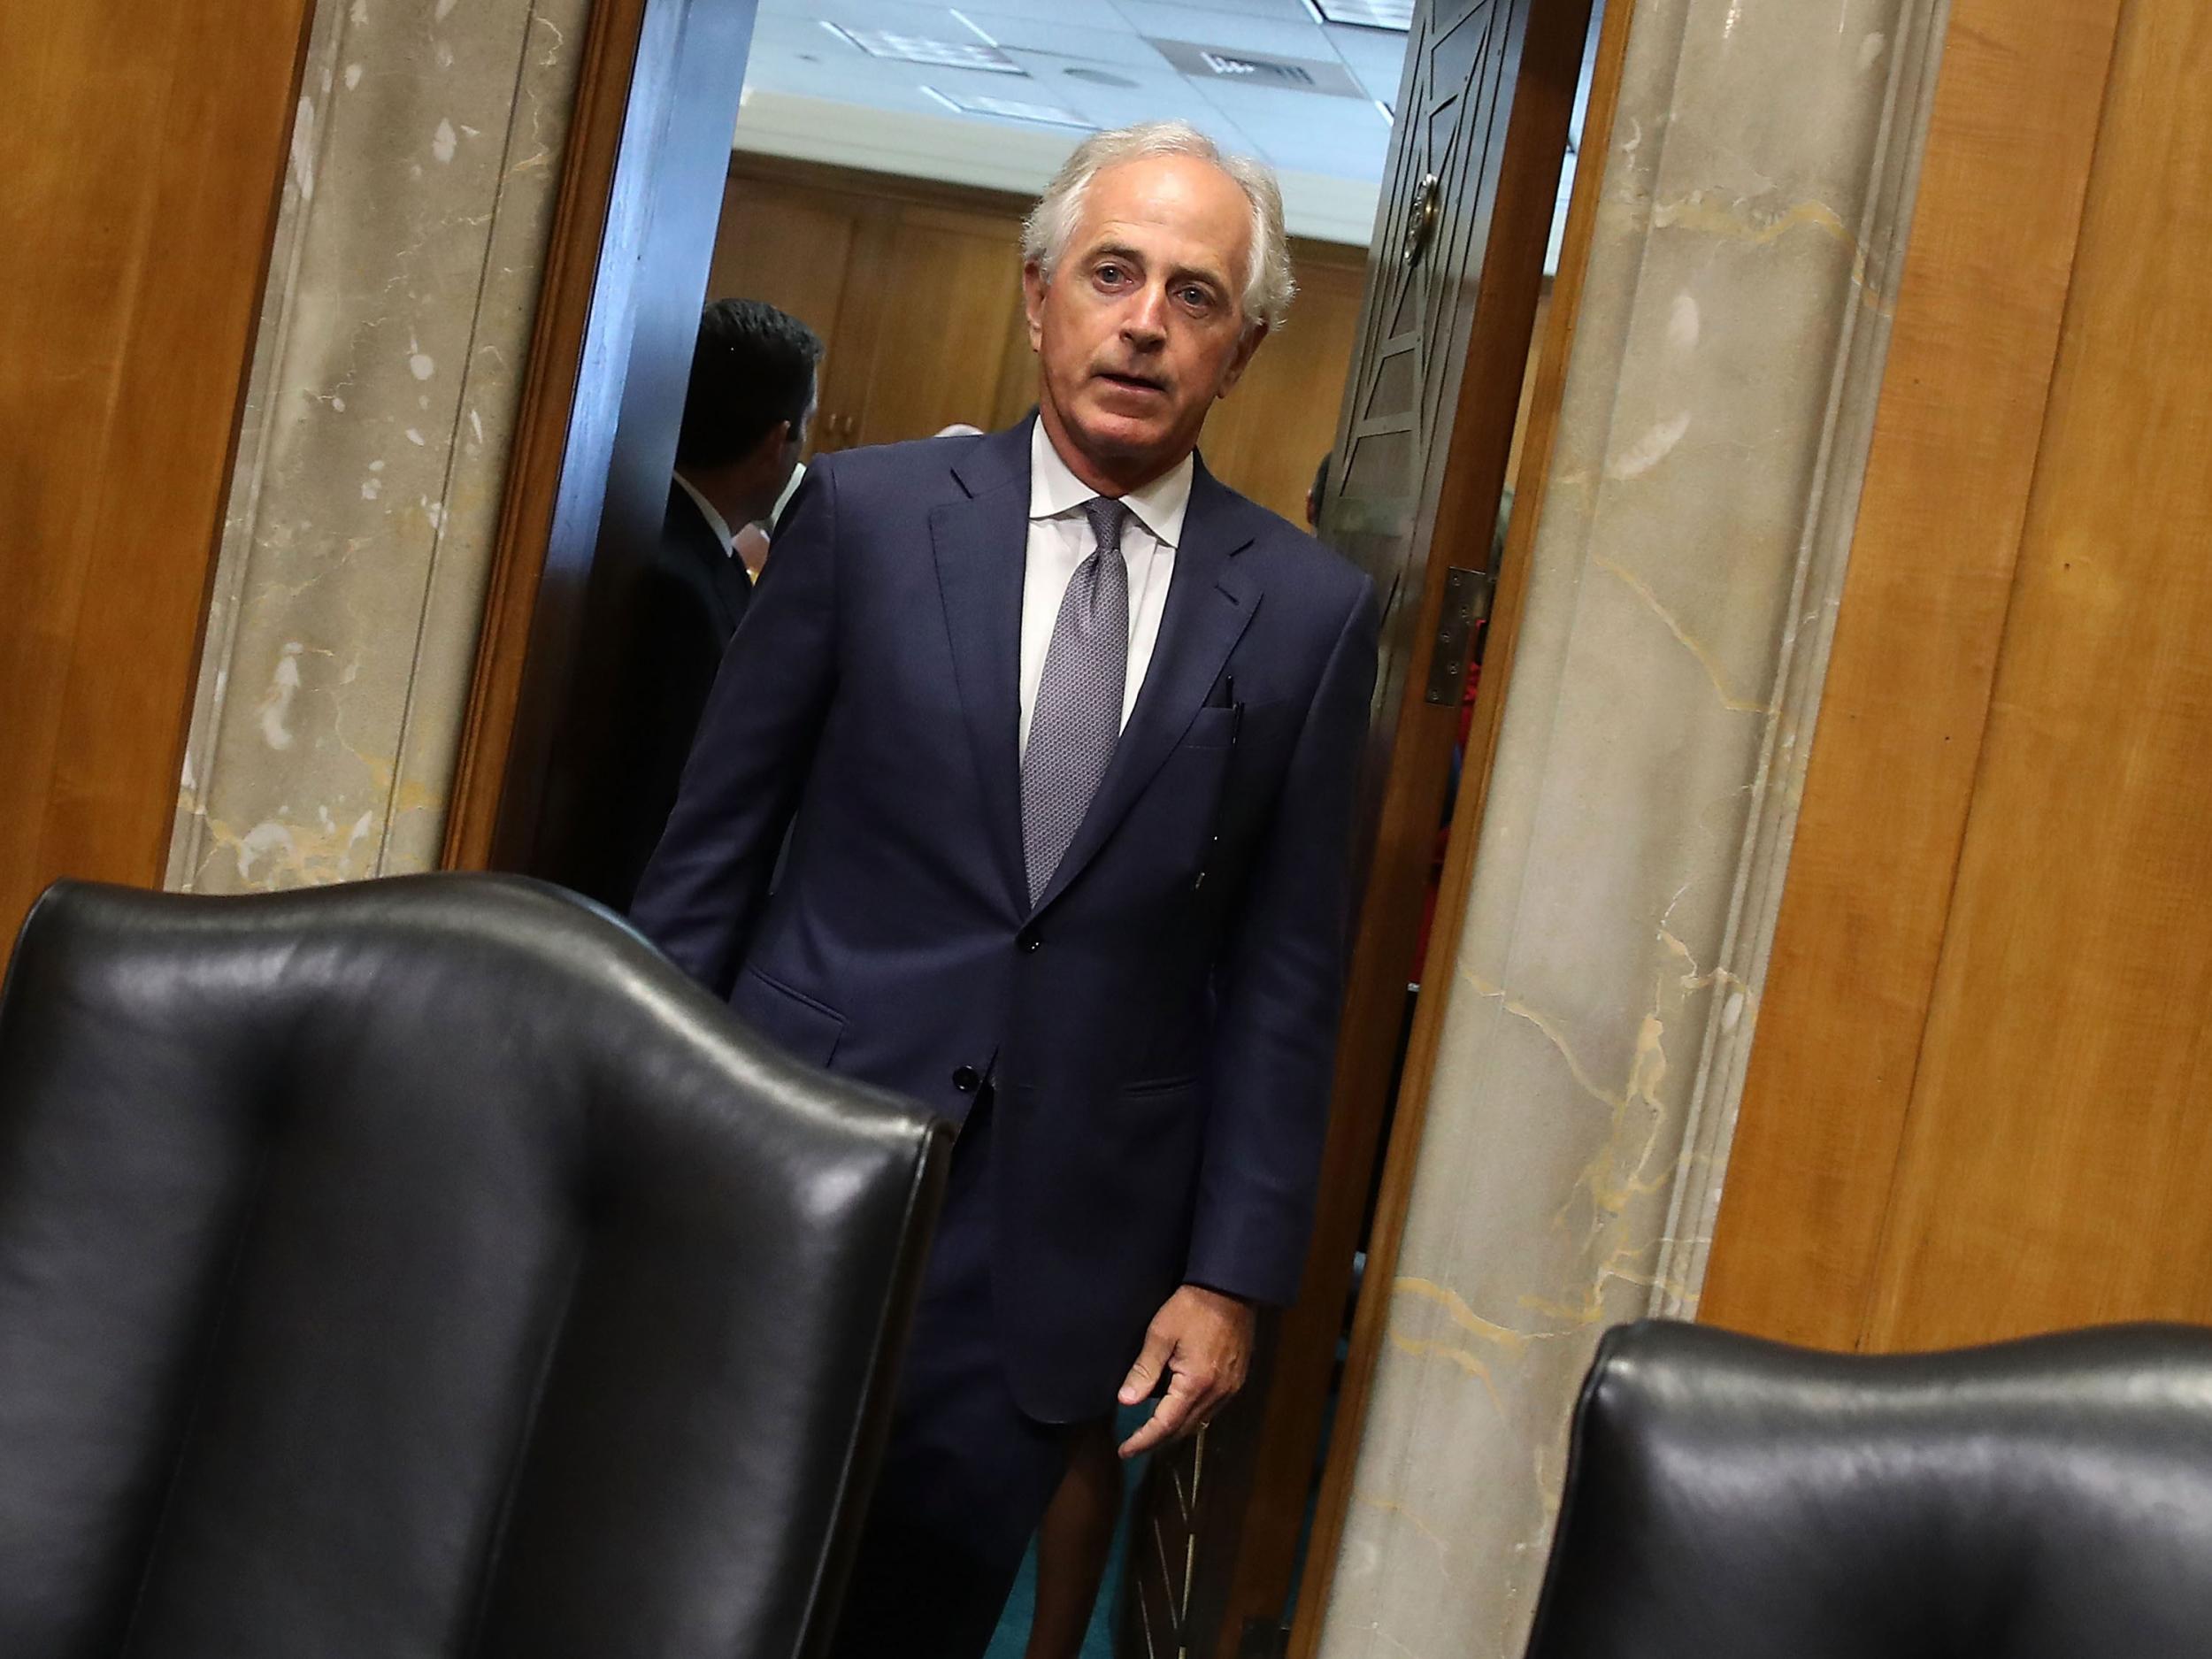 Bob Corker unleashed an extraordinary attack on President Trump in an interview